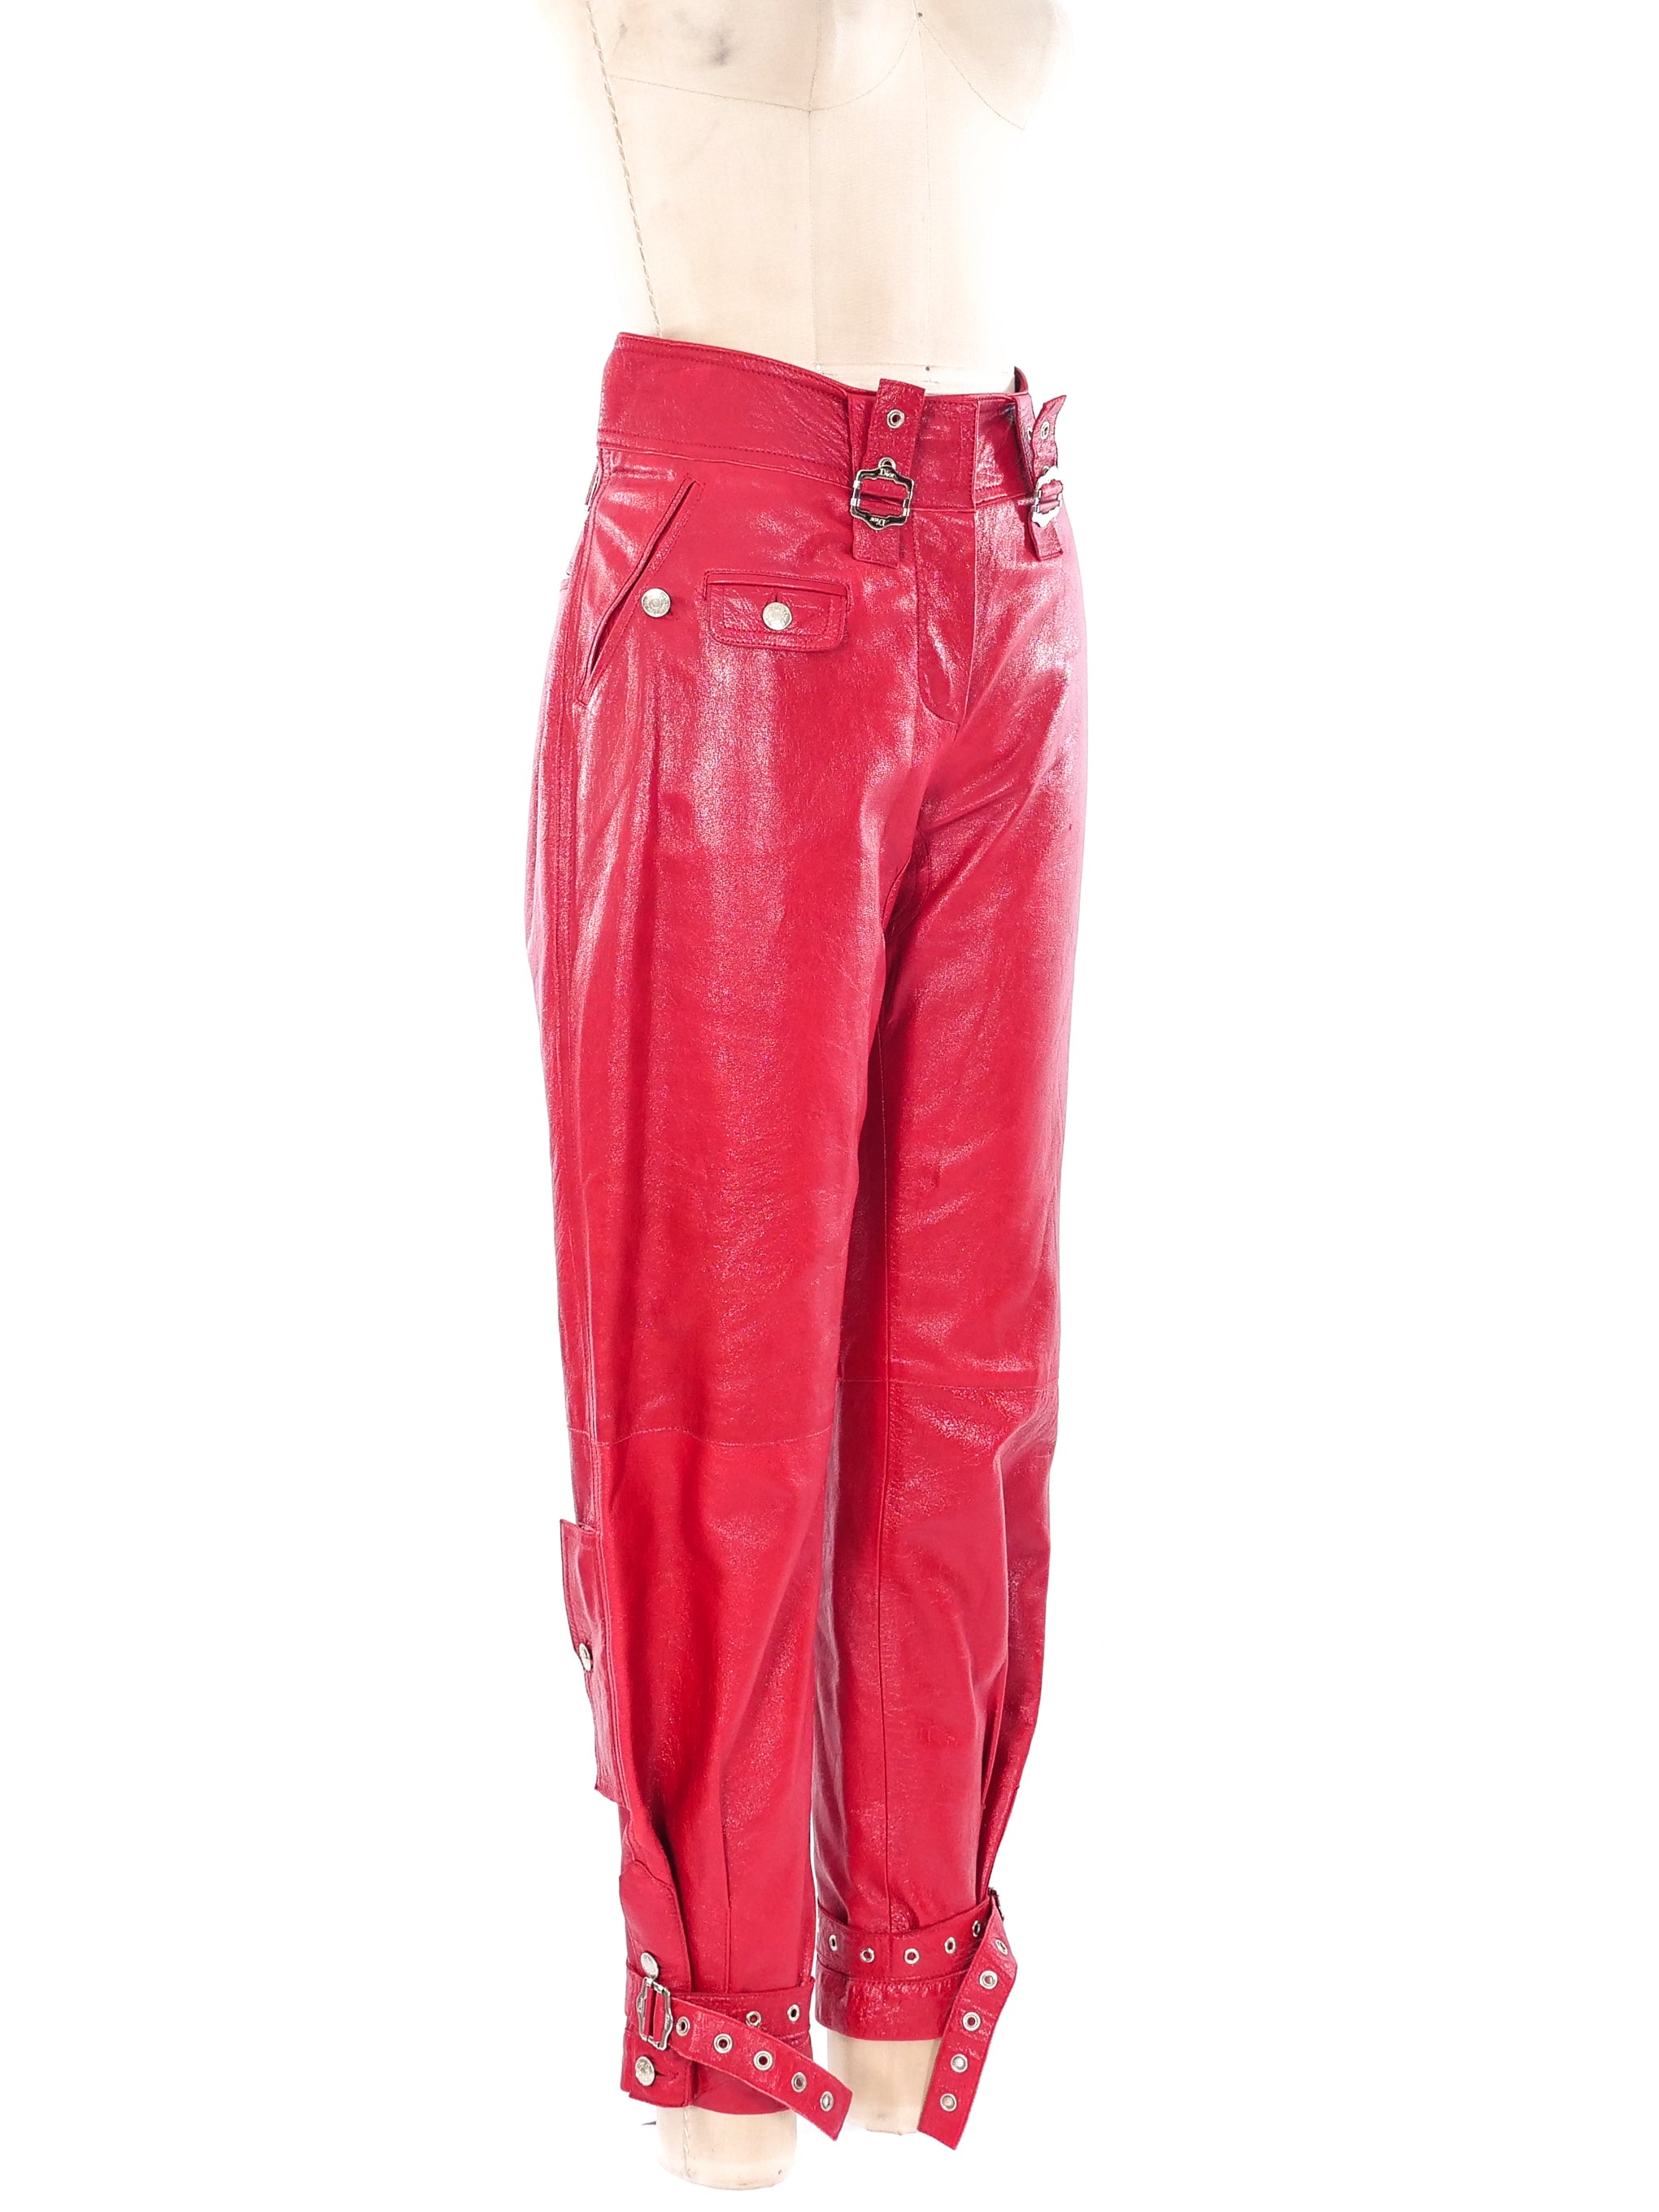 Christian Dior Red Leather Pants